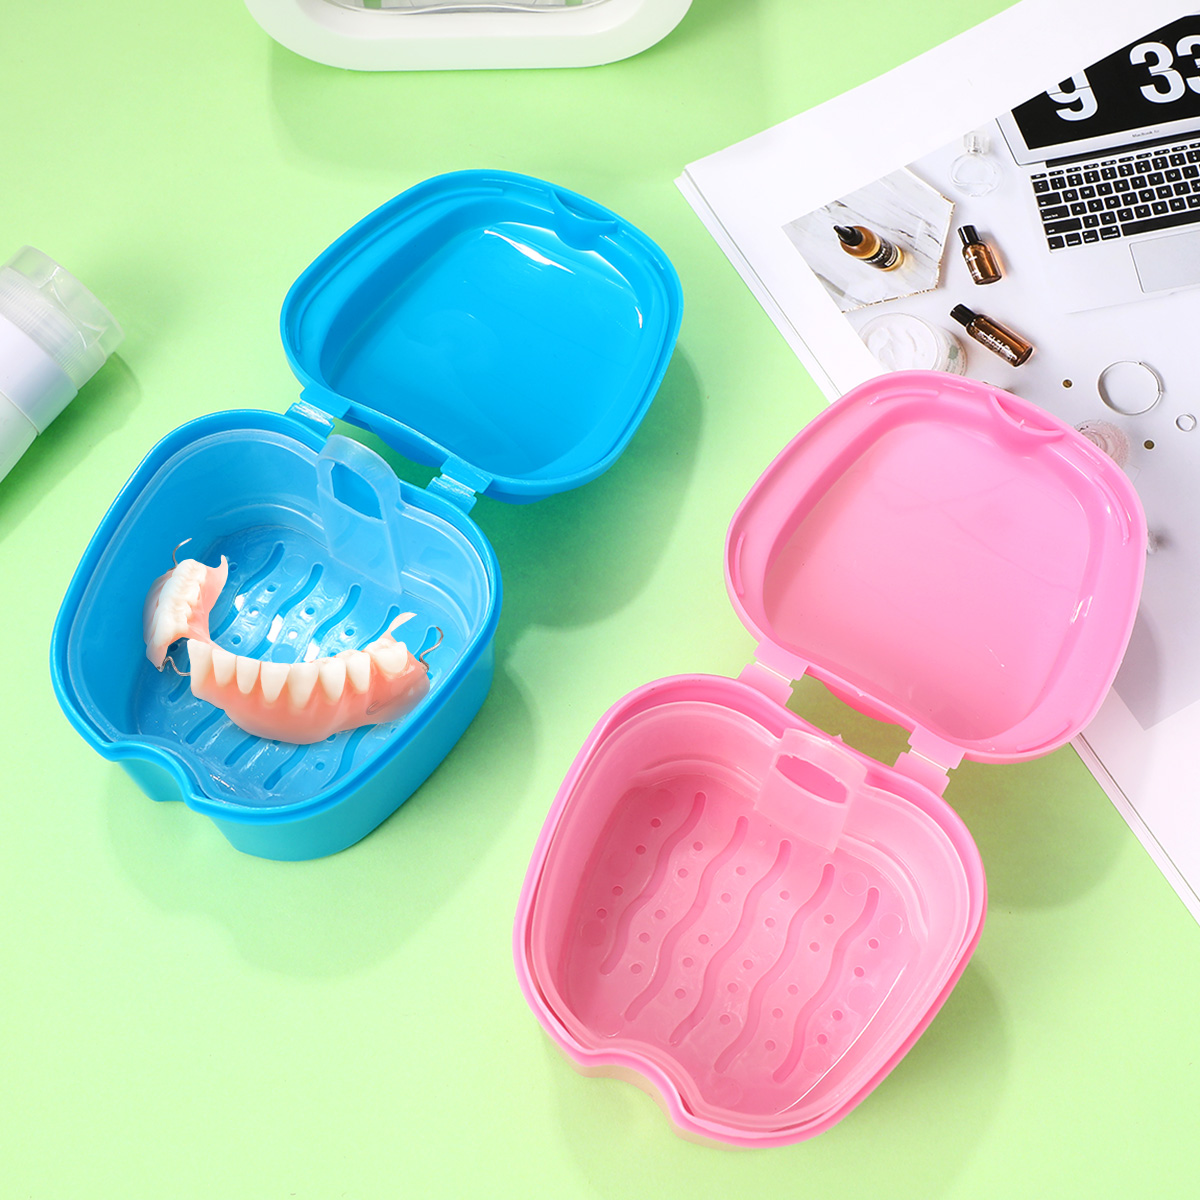 2 Pack Denture Case Denture Cup Holder Storage Soak Container with Strainer Basket for Travel Cleaning